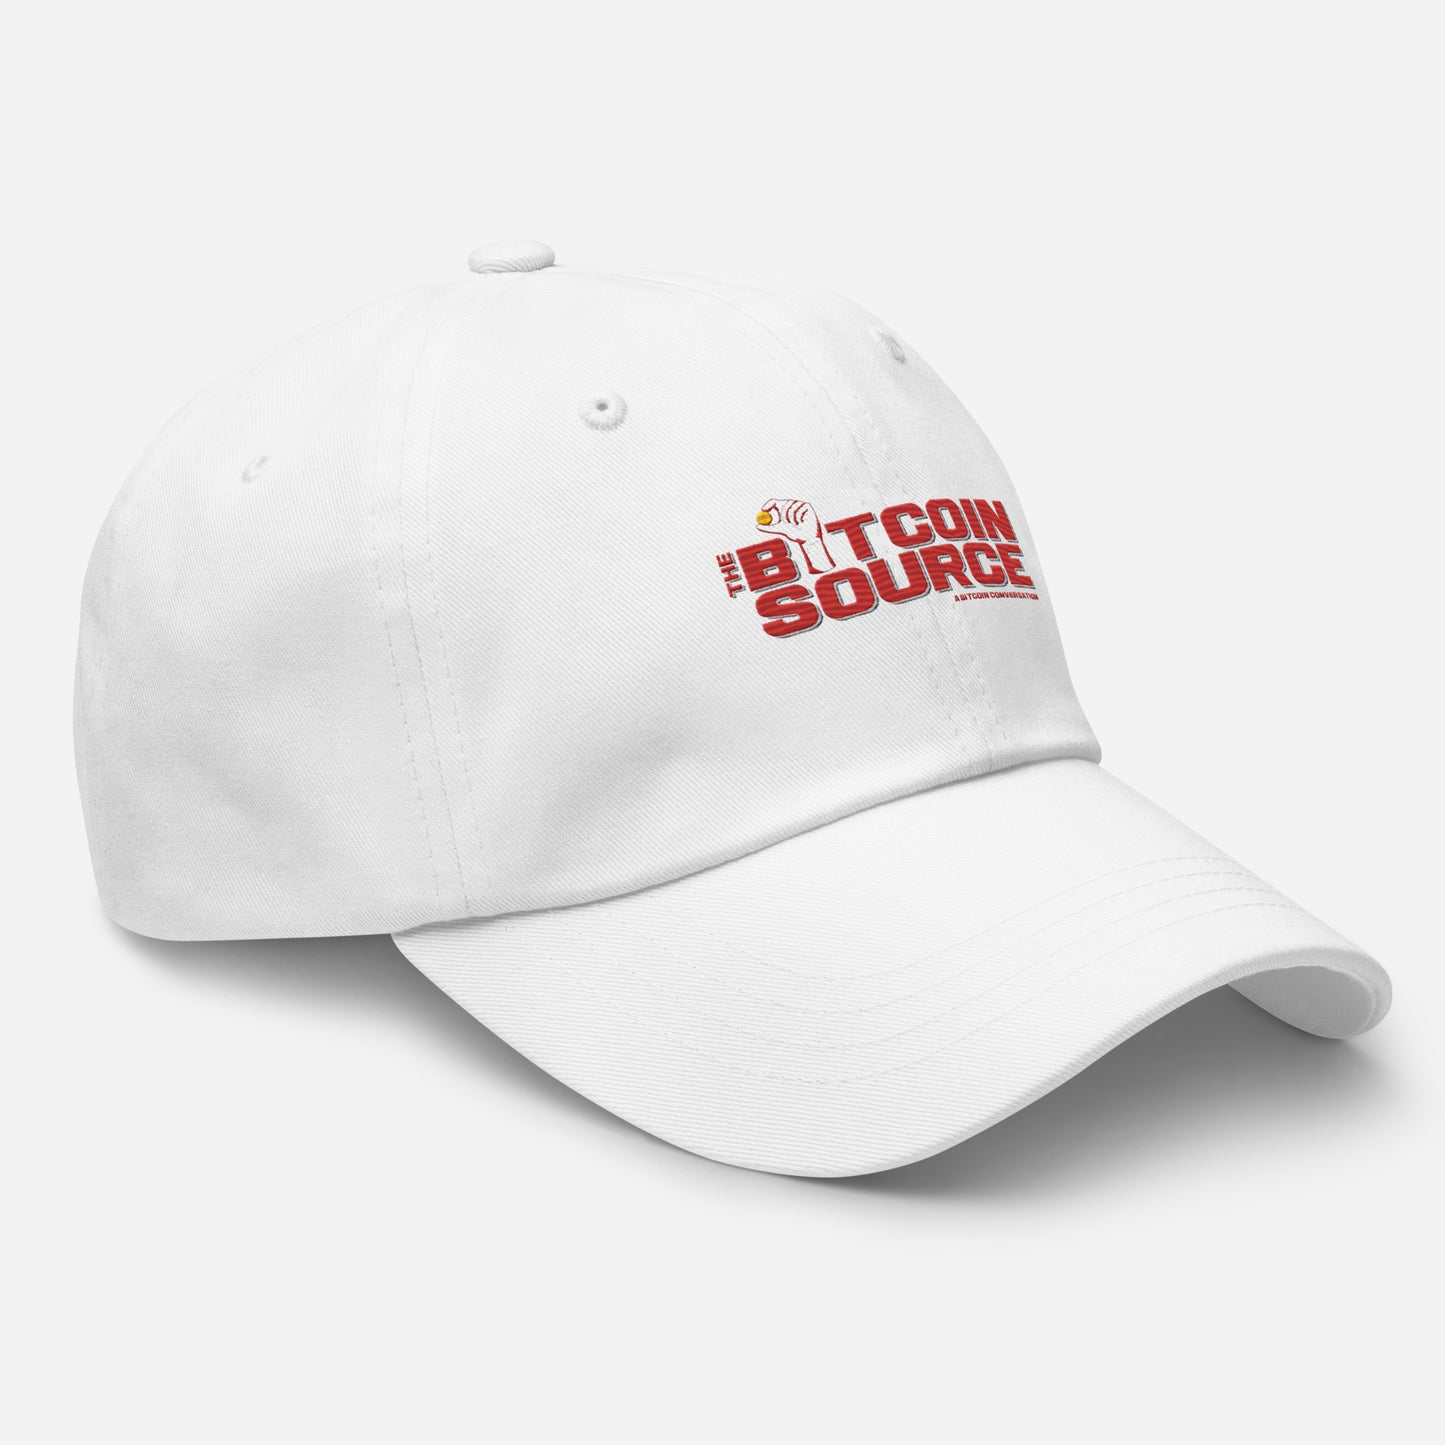 The Bitcoin Source Dad hat